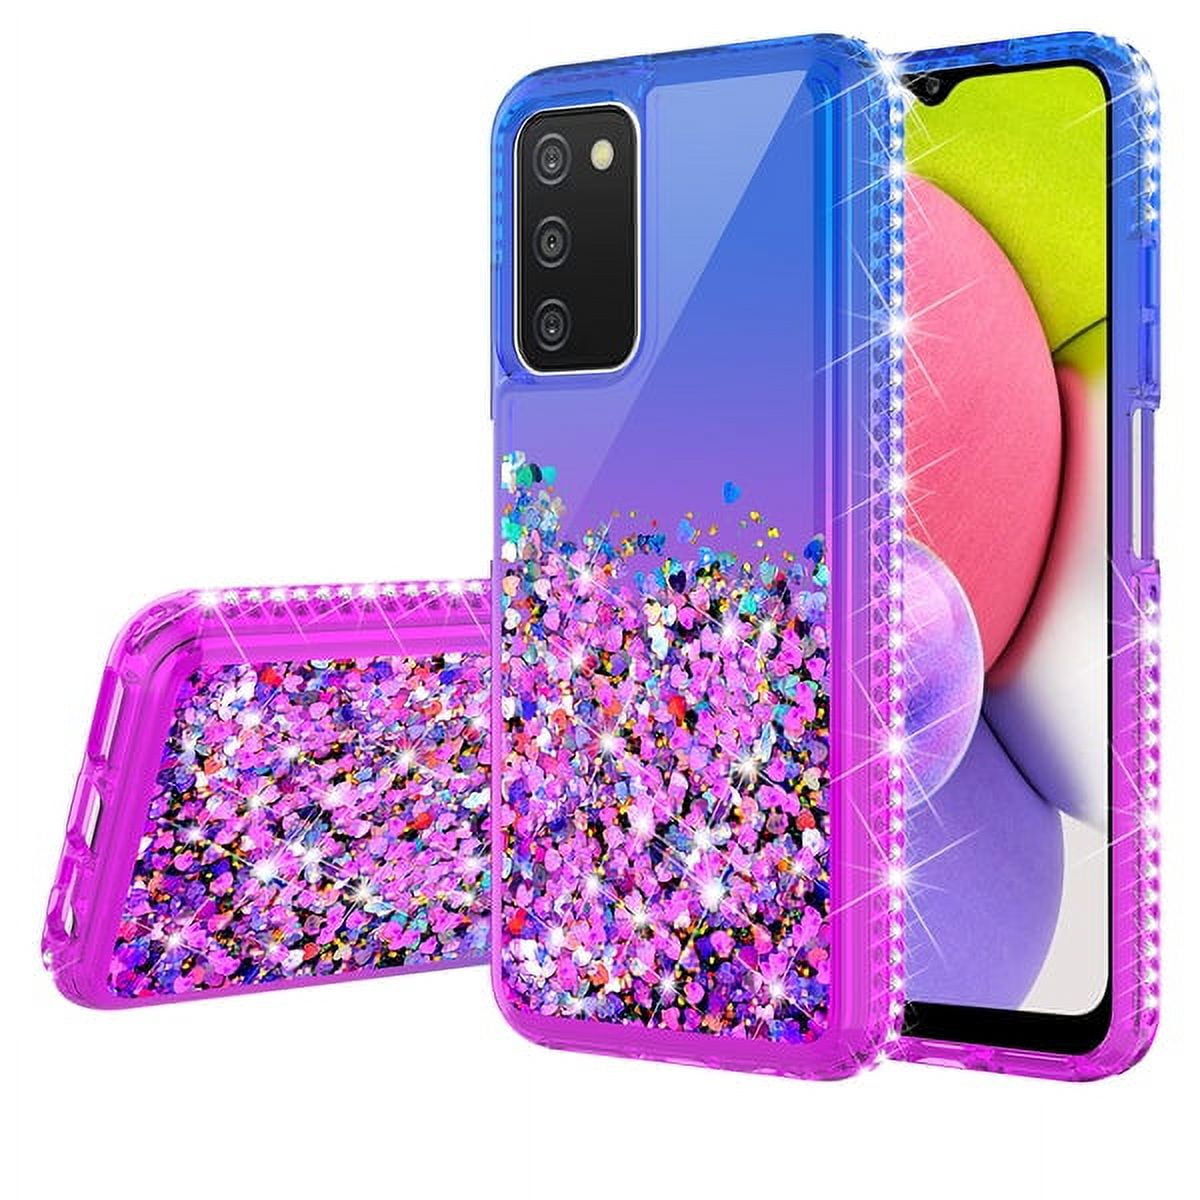 B-wishy for Samsung Galaxy A03s Case for Women, Glitter Crystal Butterfly Heart Floral Slim TPU Luxury Bling Cute Girls Protective Cover with Ring